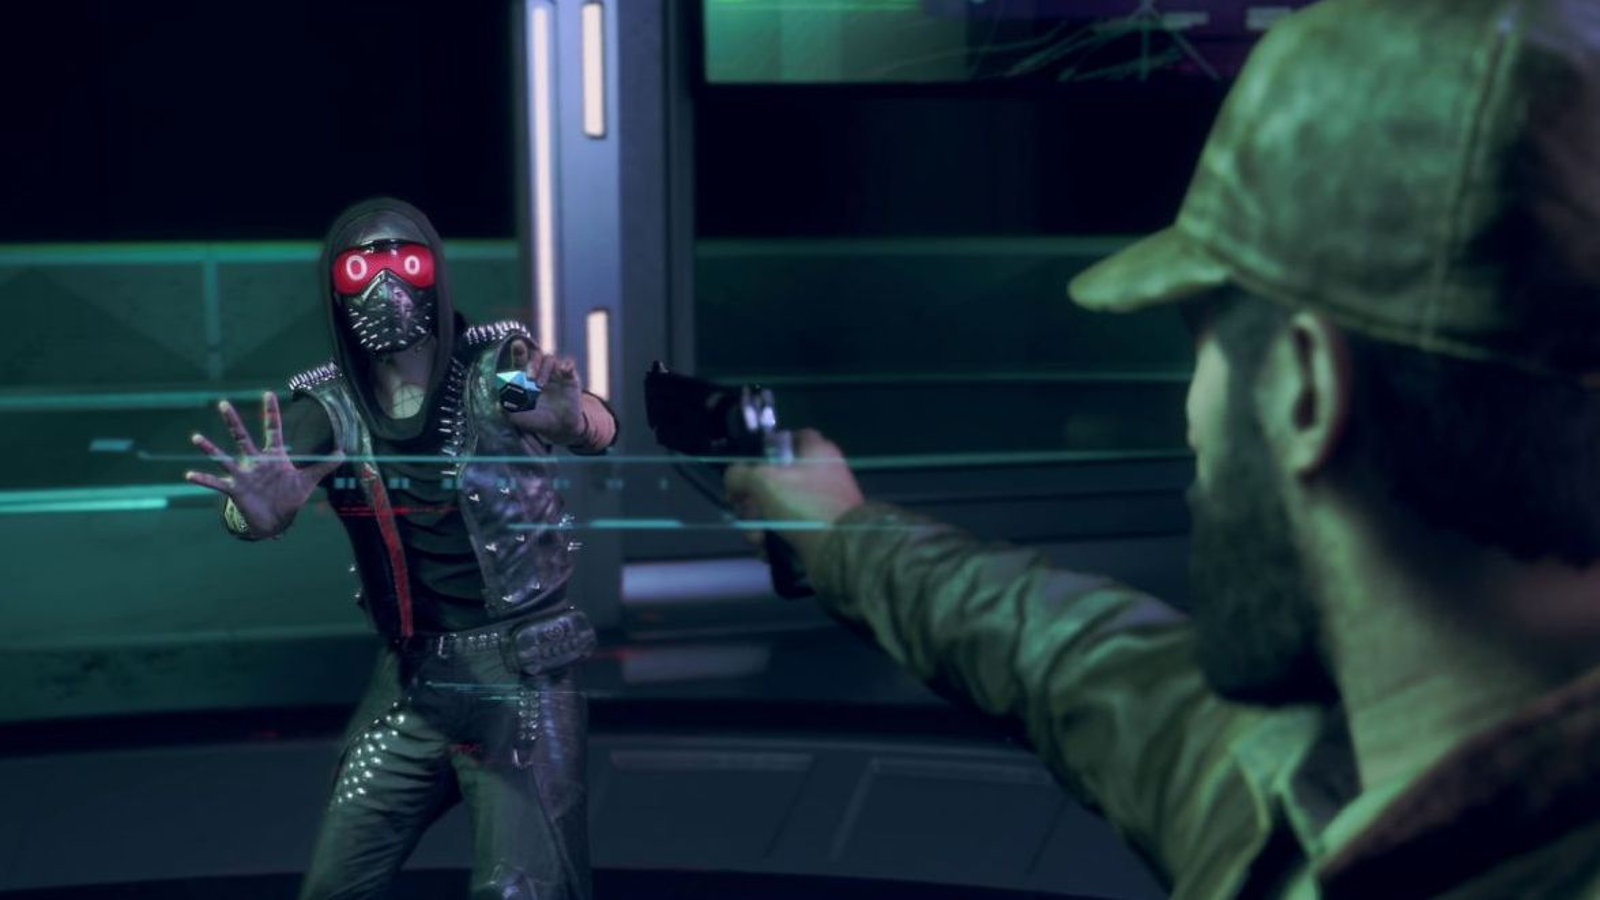 Watch Dogs: Legion Review: A New Setting for the Series